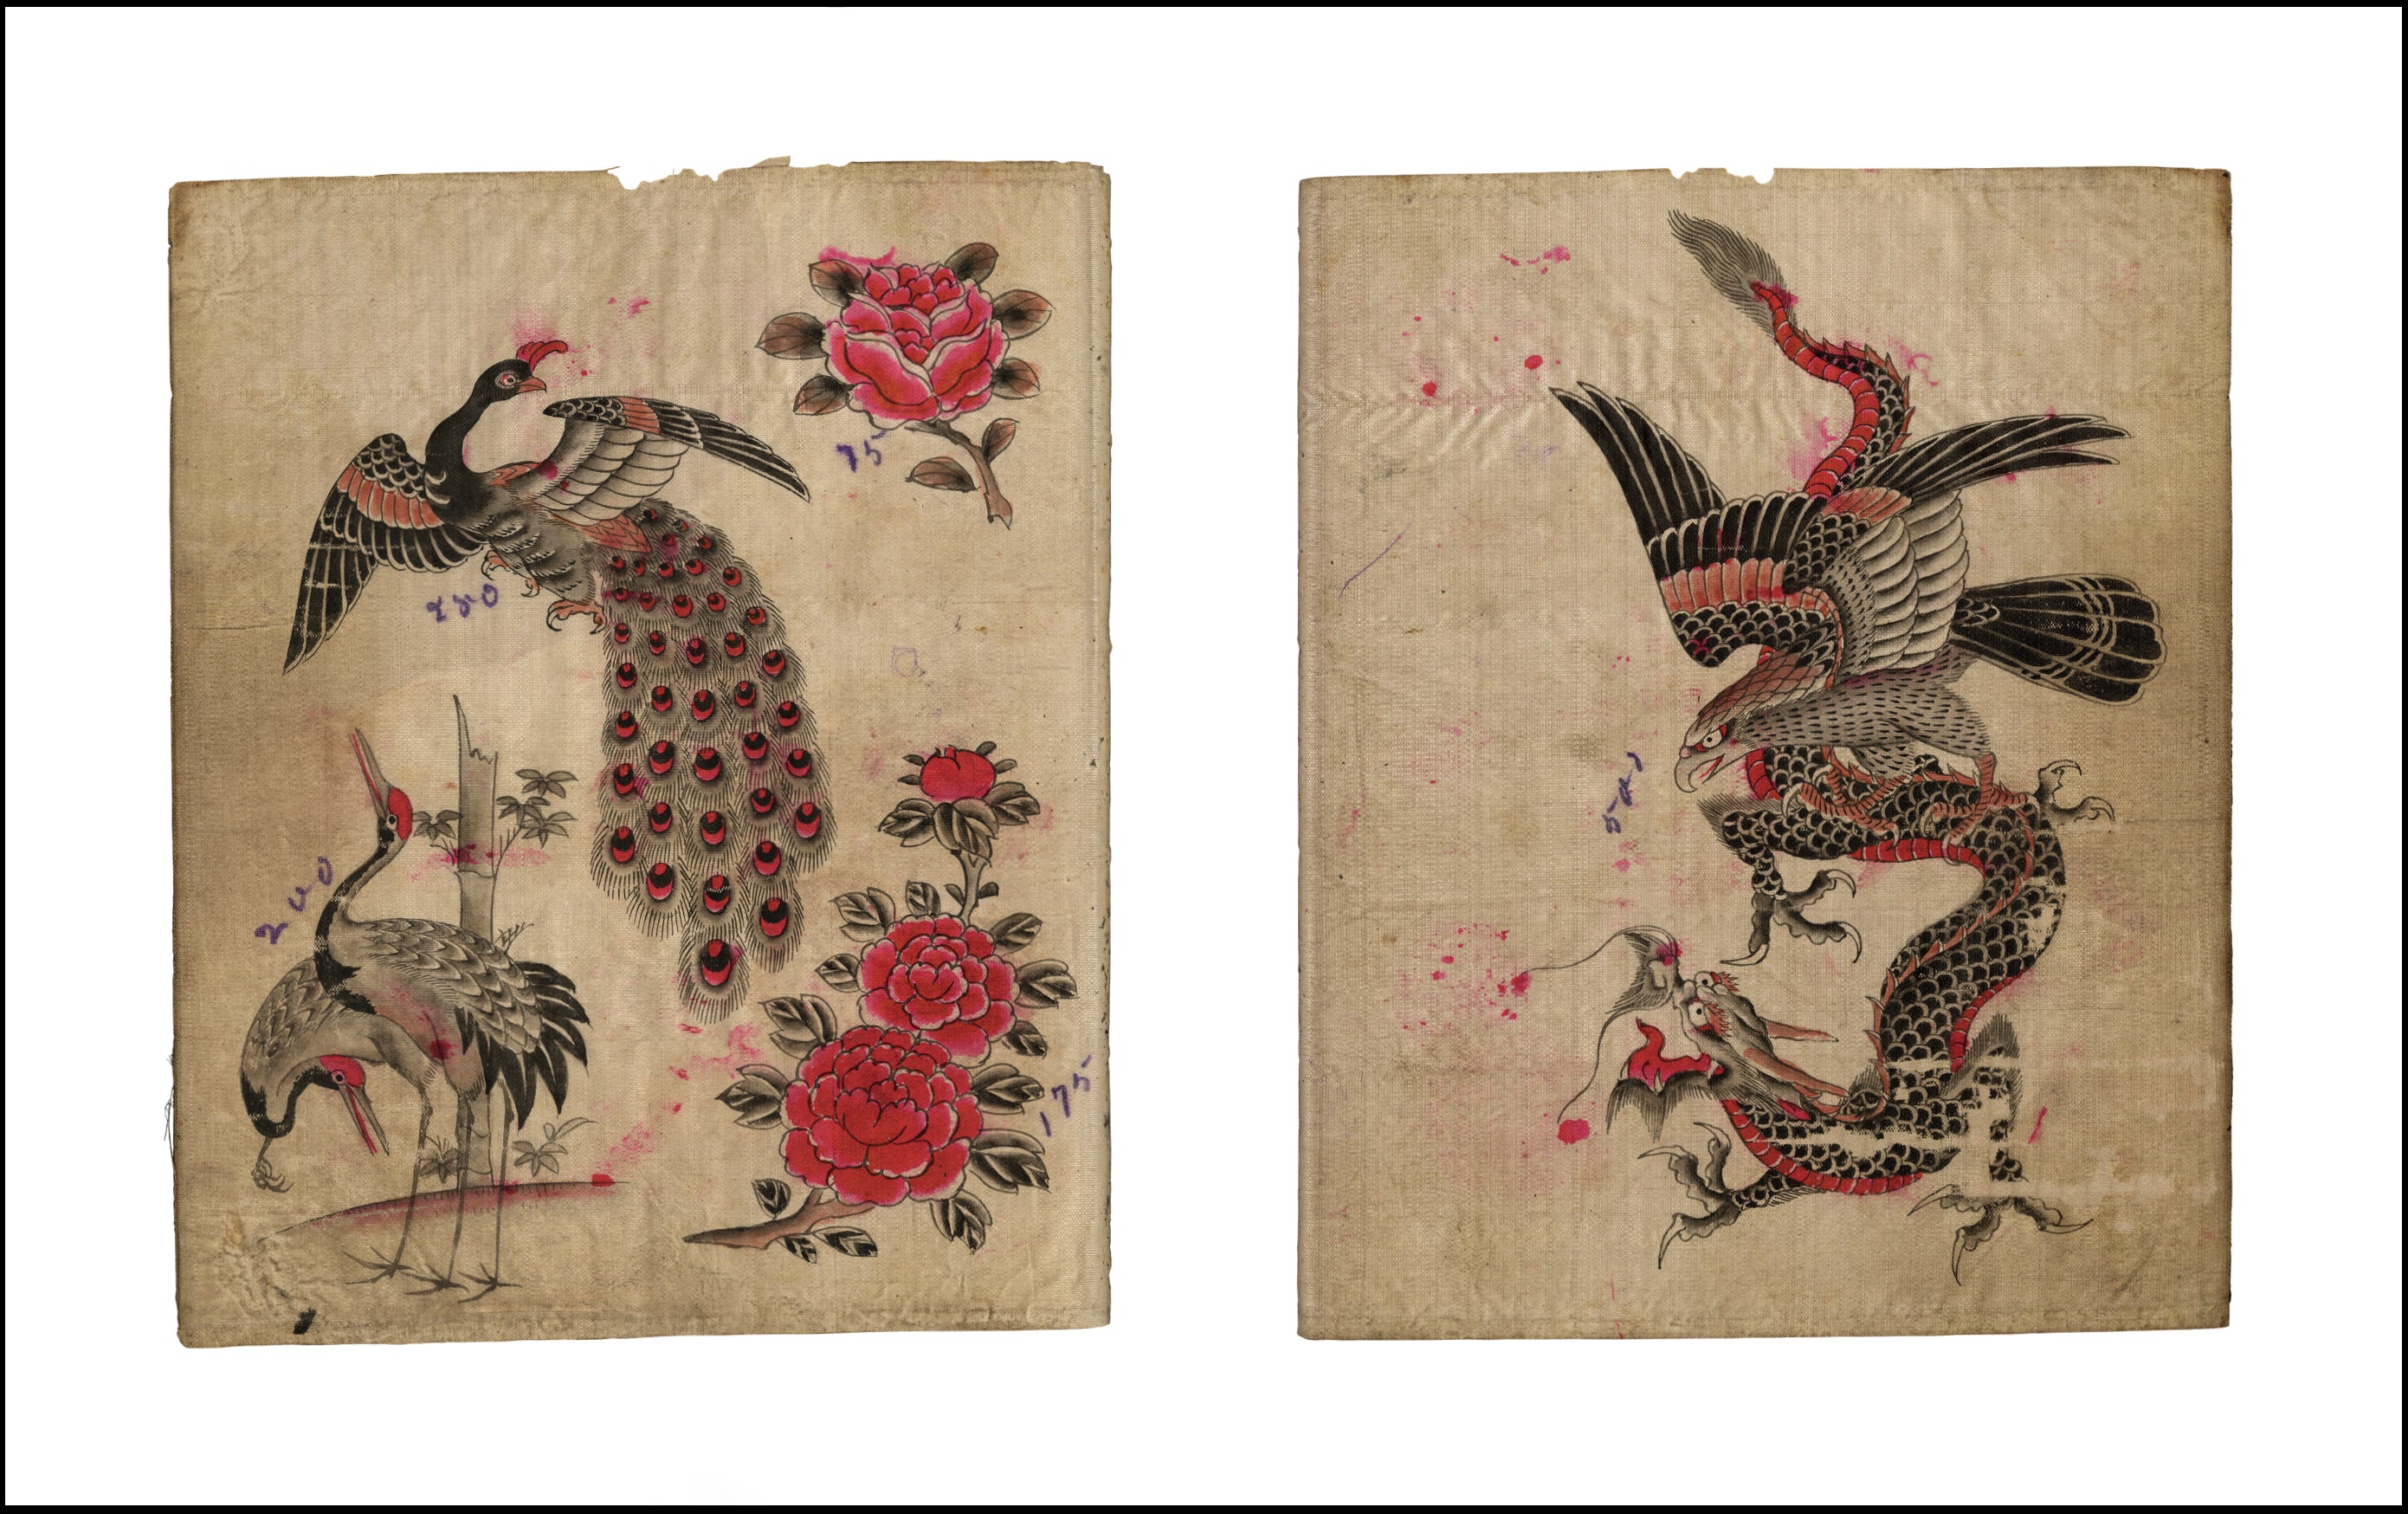 Floating West: Antique Japanese Tattoo Flash from the Collection of Nick York